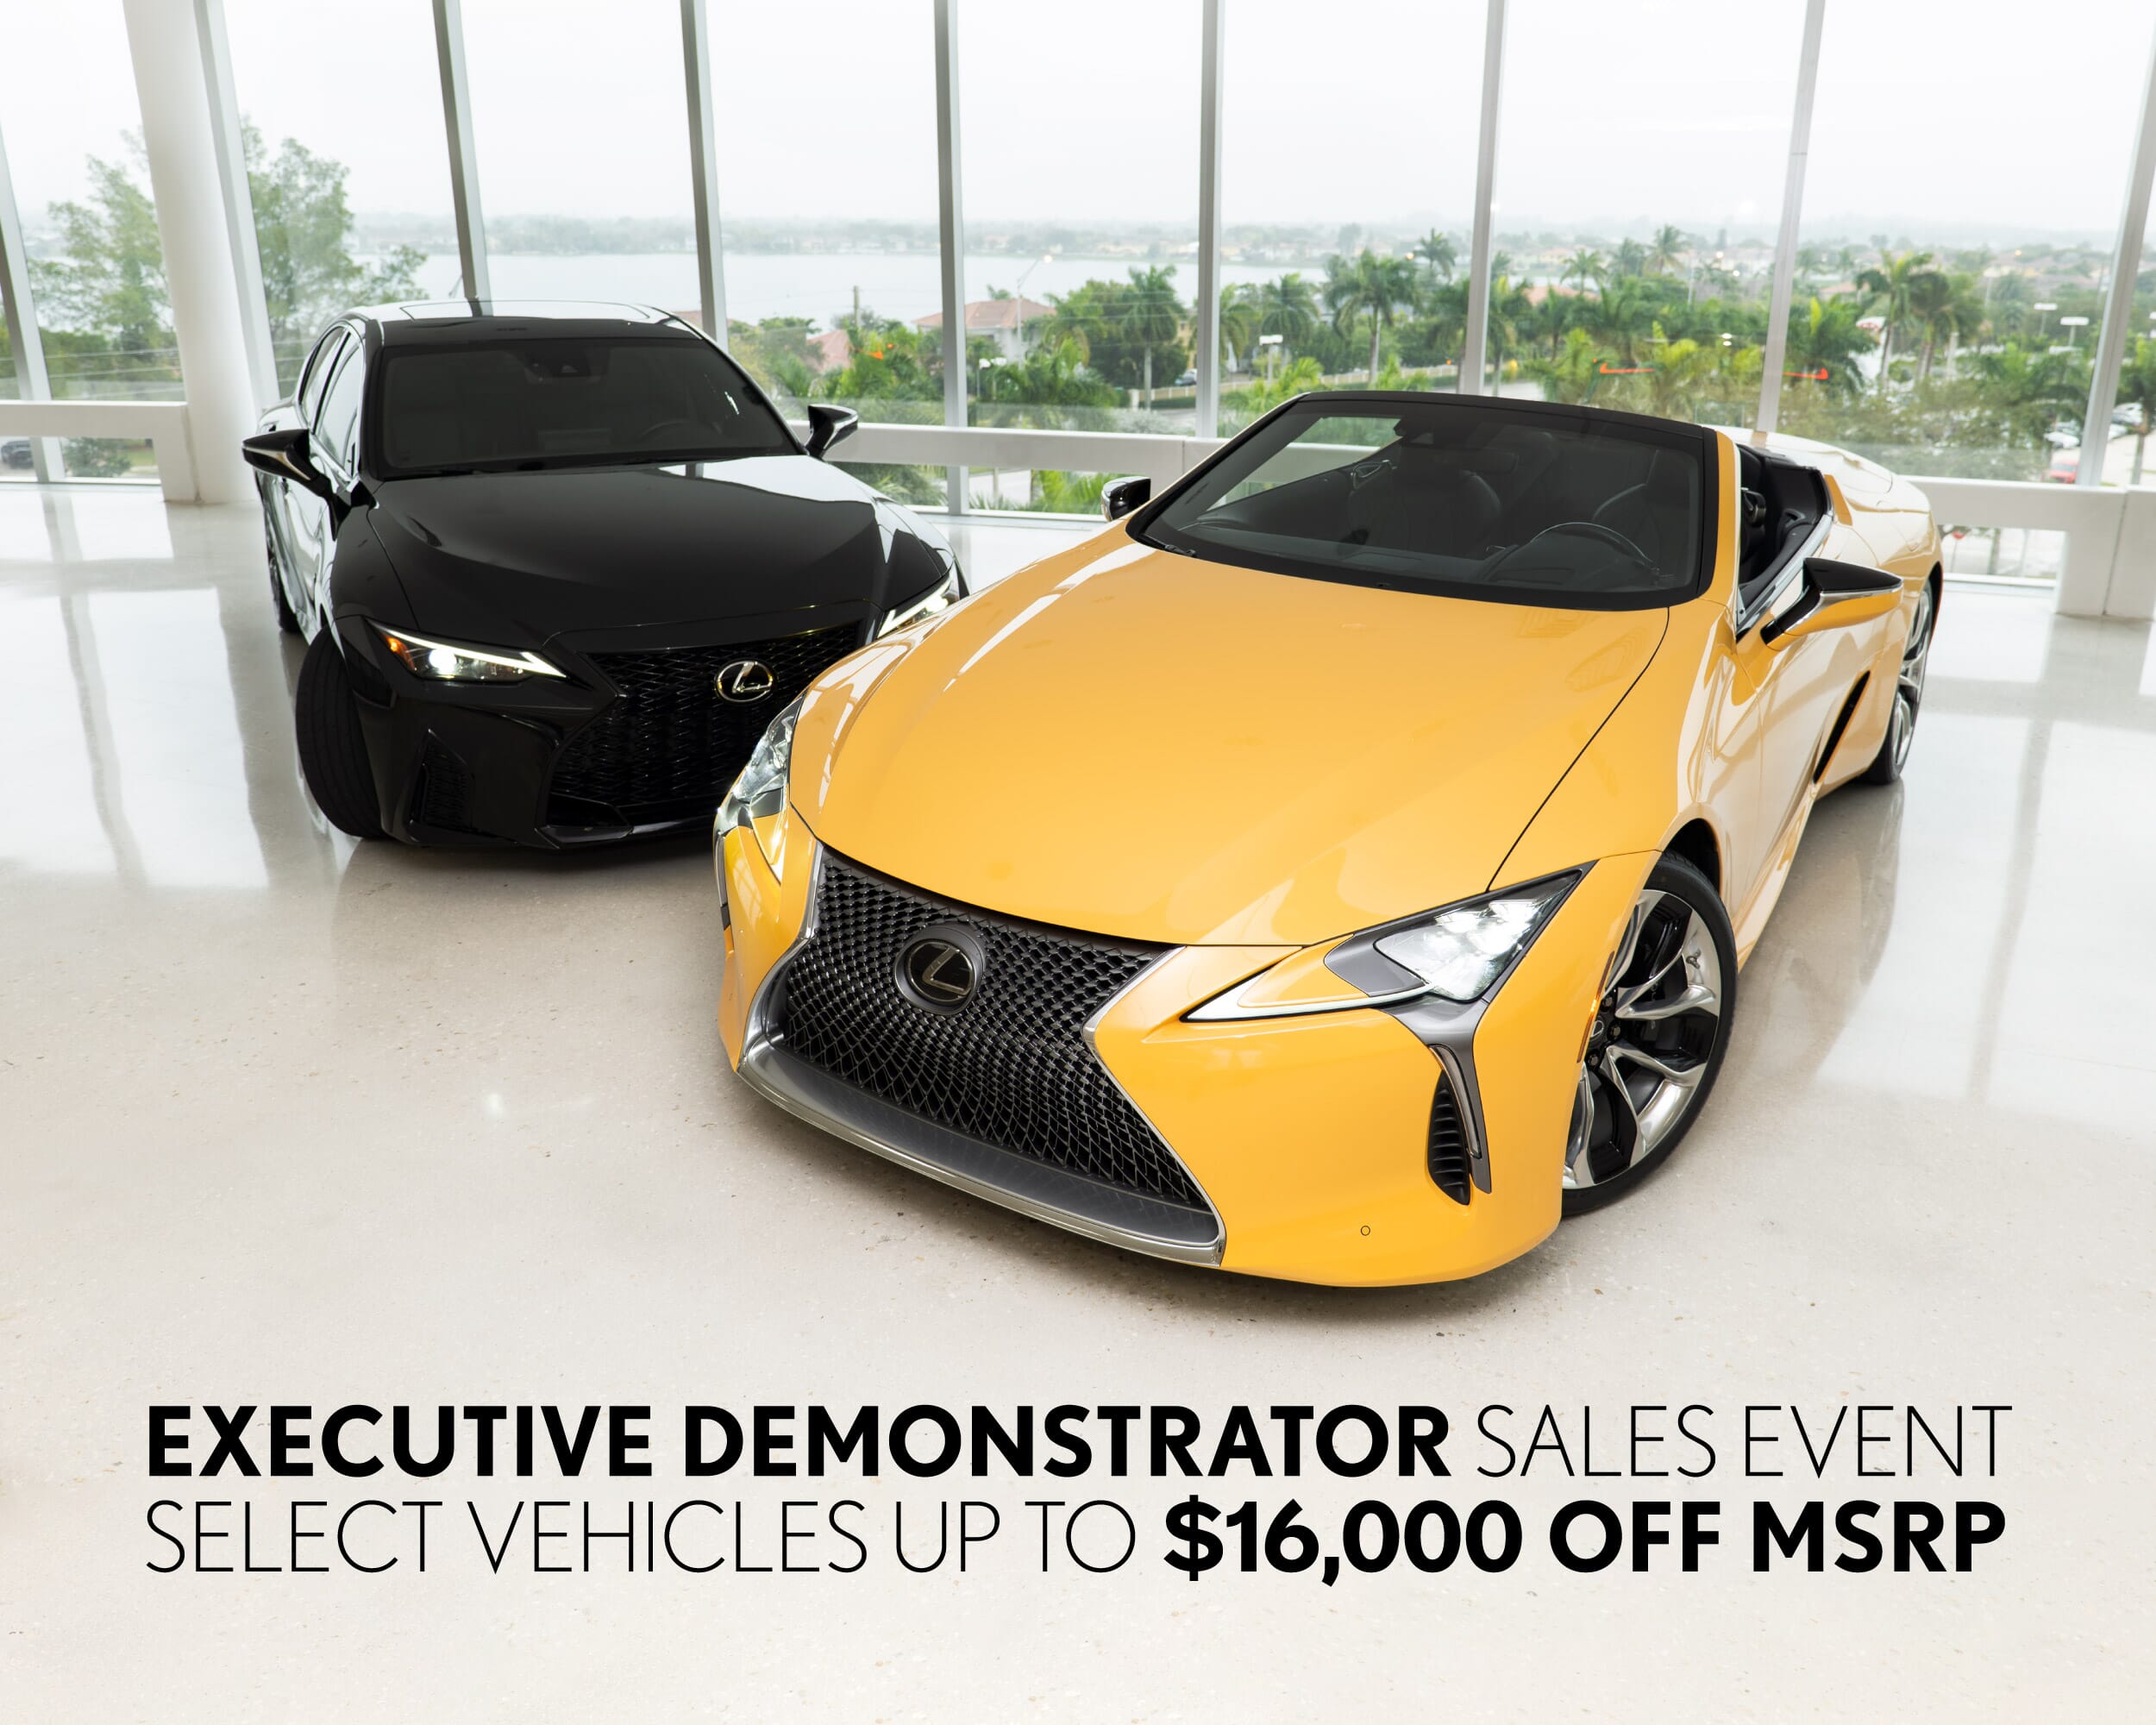 Lexus savings off MSRP and lease cash available